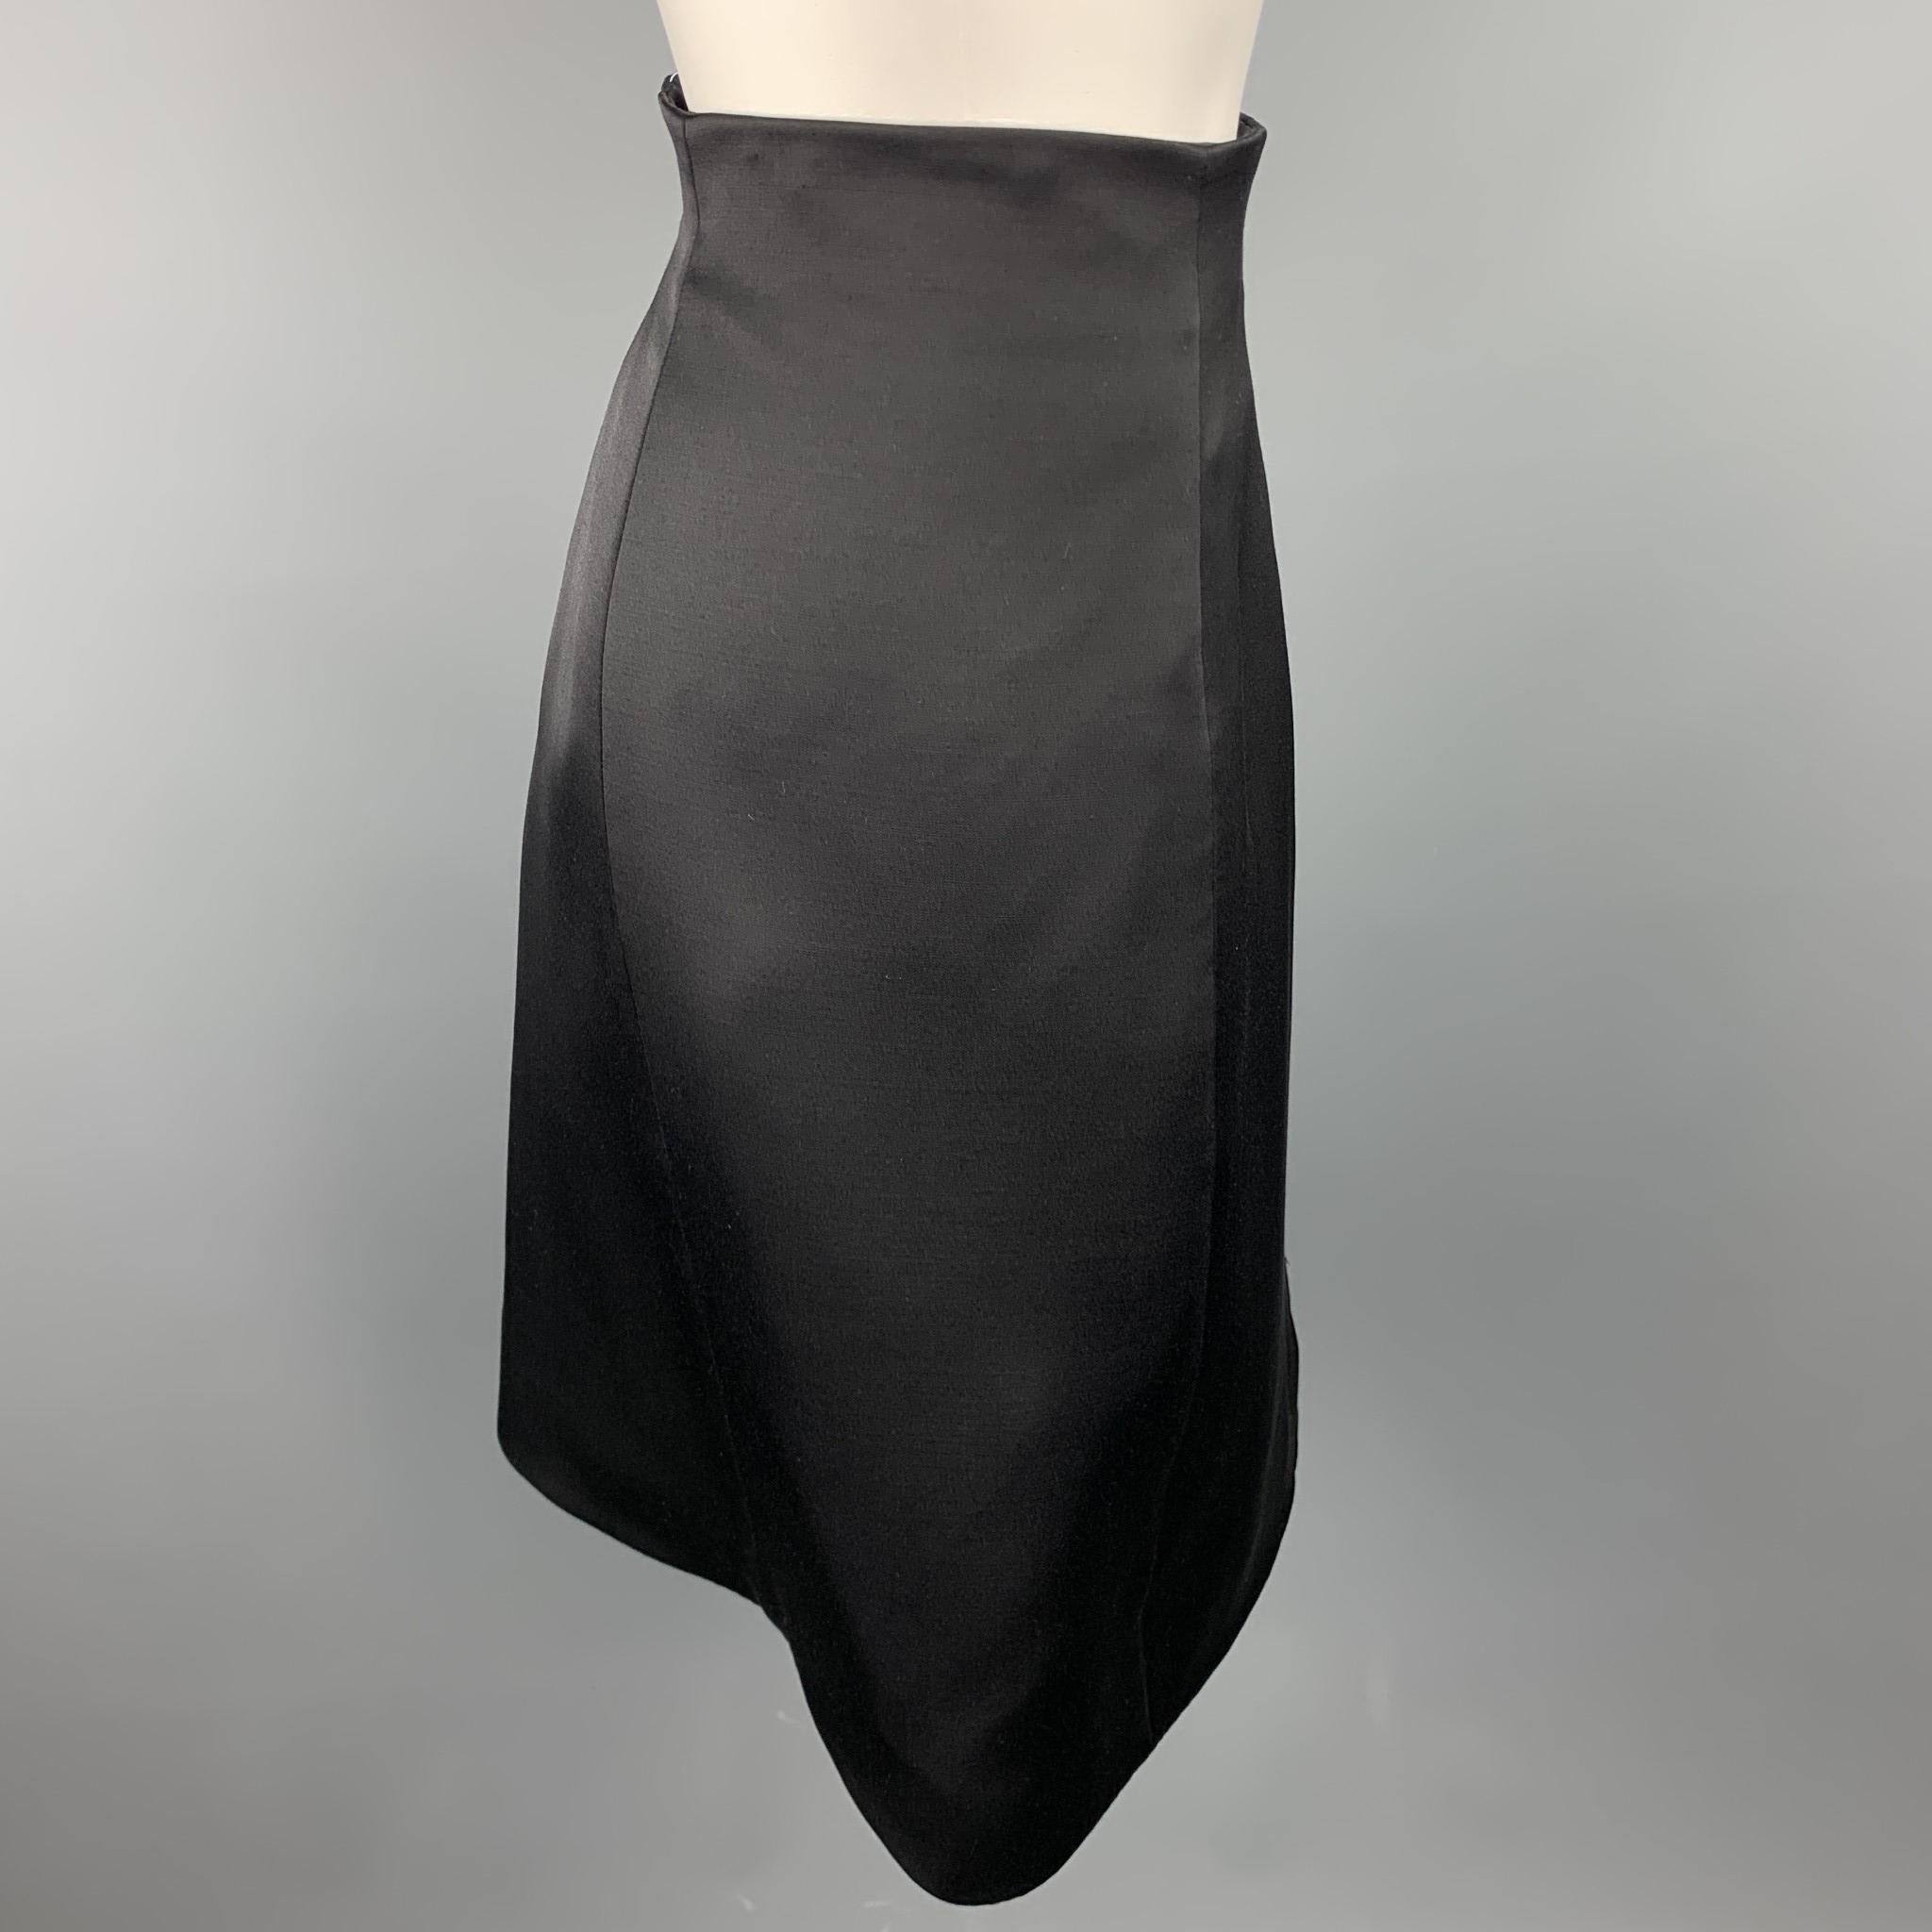 RALPH LAUREN skirt comes in a black silk / wool with a full liner featuring an a-line style and a side zipper closure. Made in USA.

Excellent Pre-Owned Condition.
Marked: US 4

Measurements:

Waist: 26 in. 
Hip: 38 in. 
Length: 22 in. 